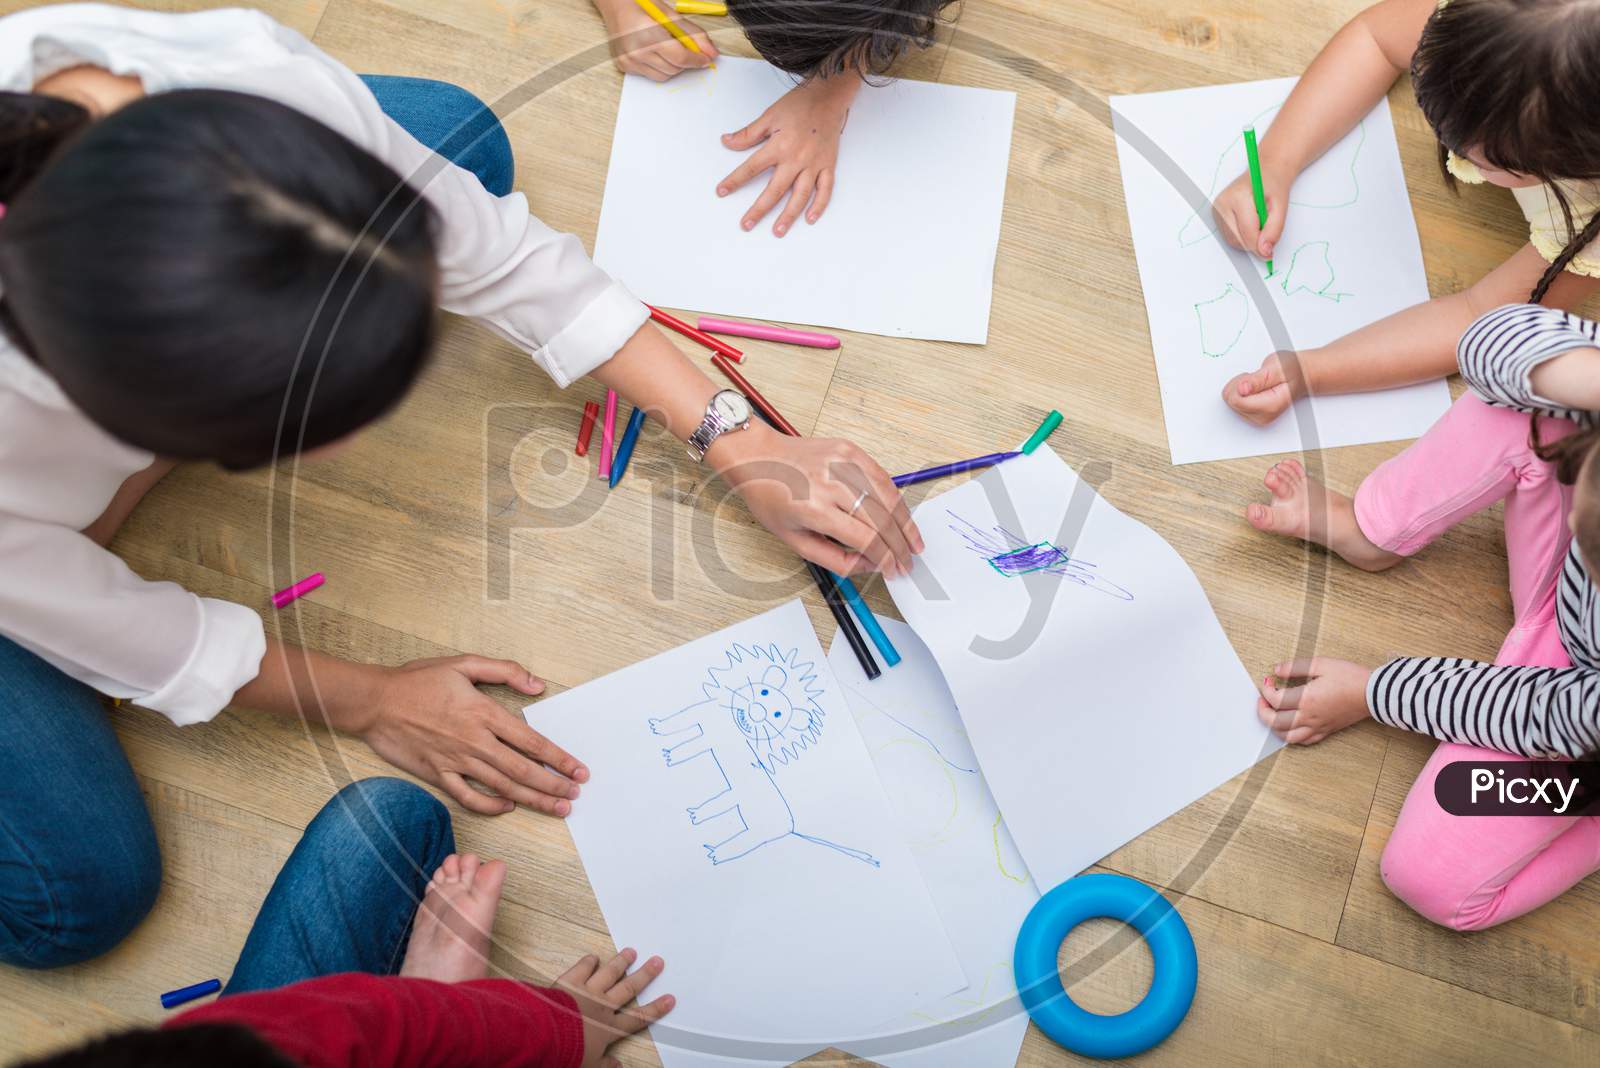 Group Of Preschool Student And Teacher Drawing On Paper In Art Class. Back To School And Education Concept. People And Lifestyles Theme.  Classroom In Nursery